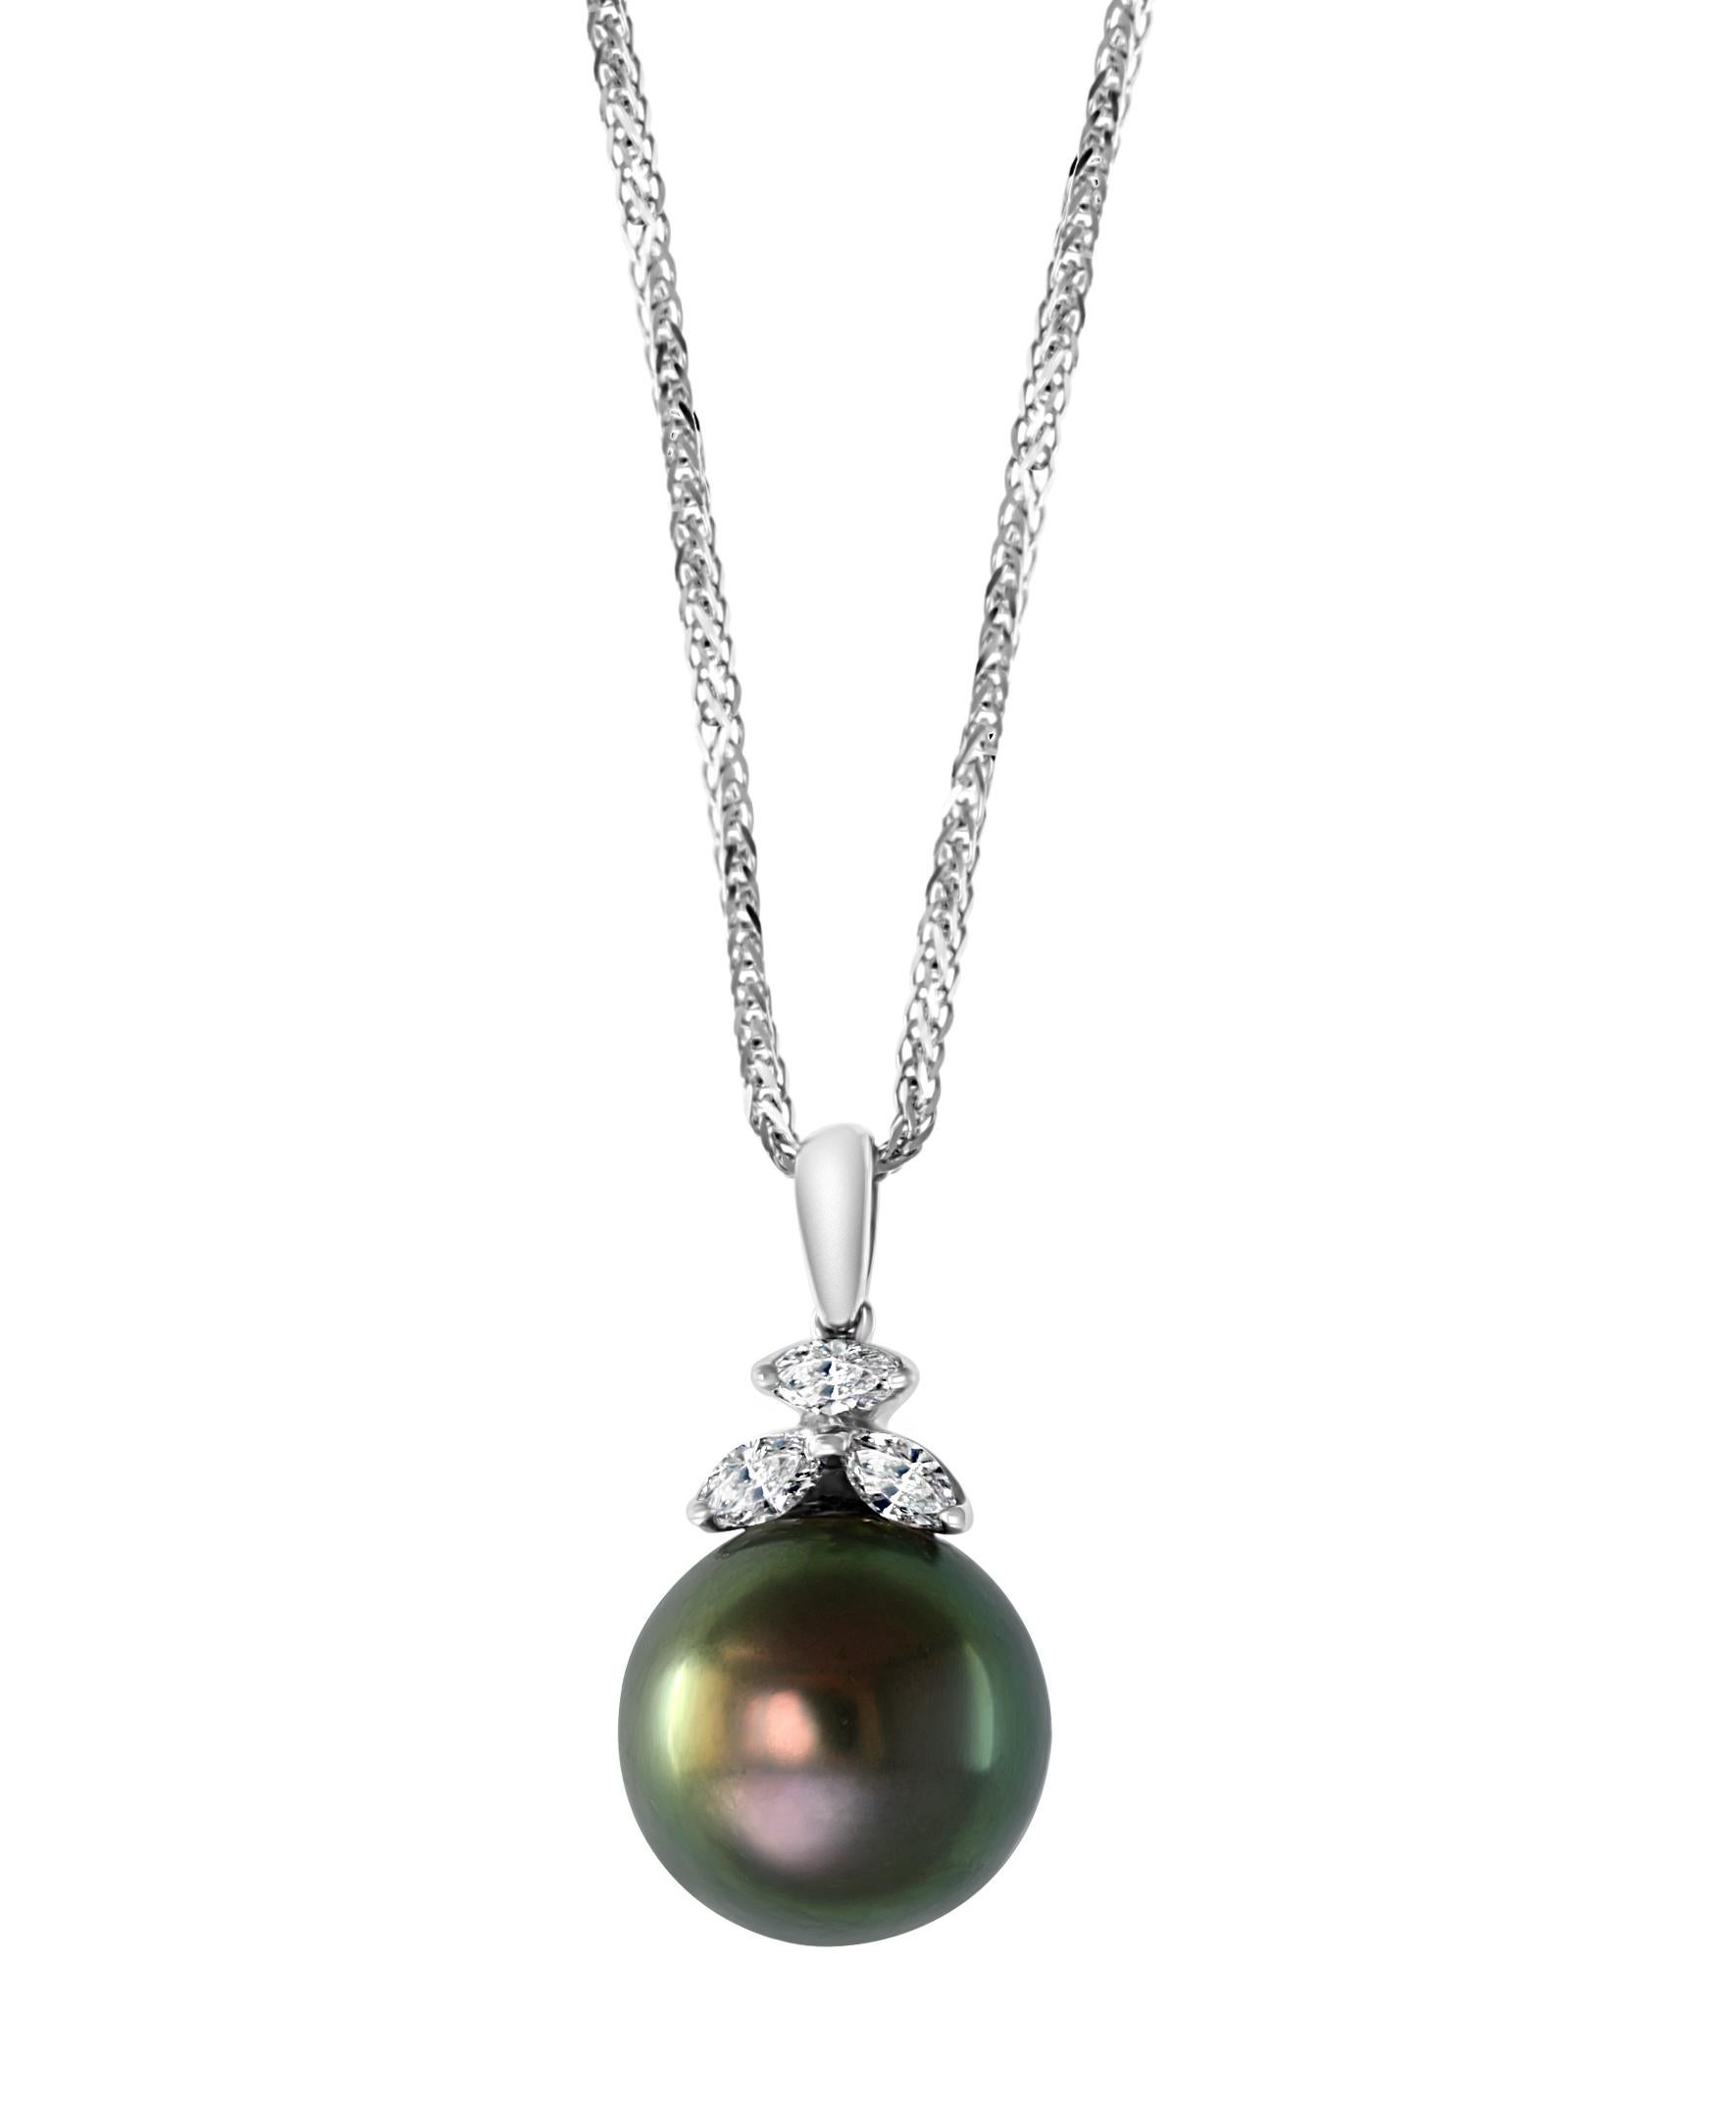 Black Tahitian Pearl and Diamond Pendant or Necklace 18 Karat Gold with Chain For Sale 4